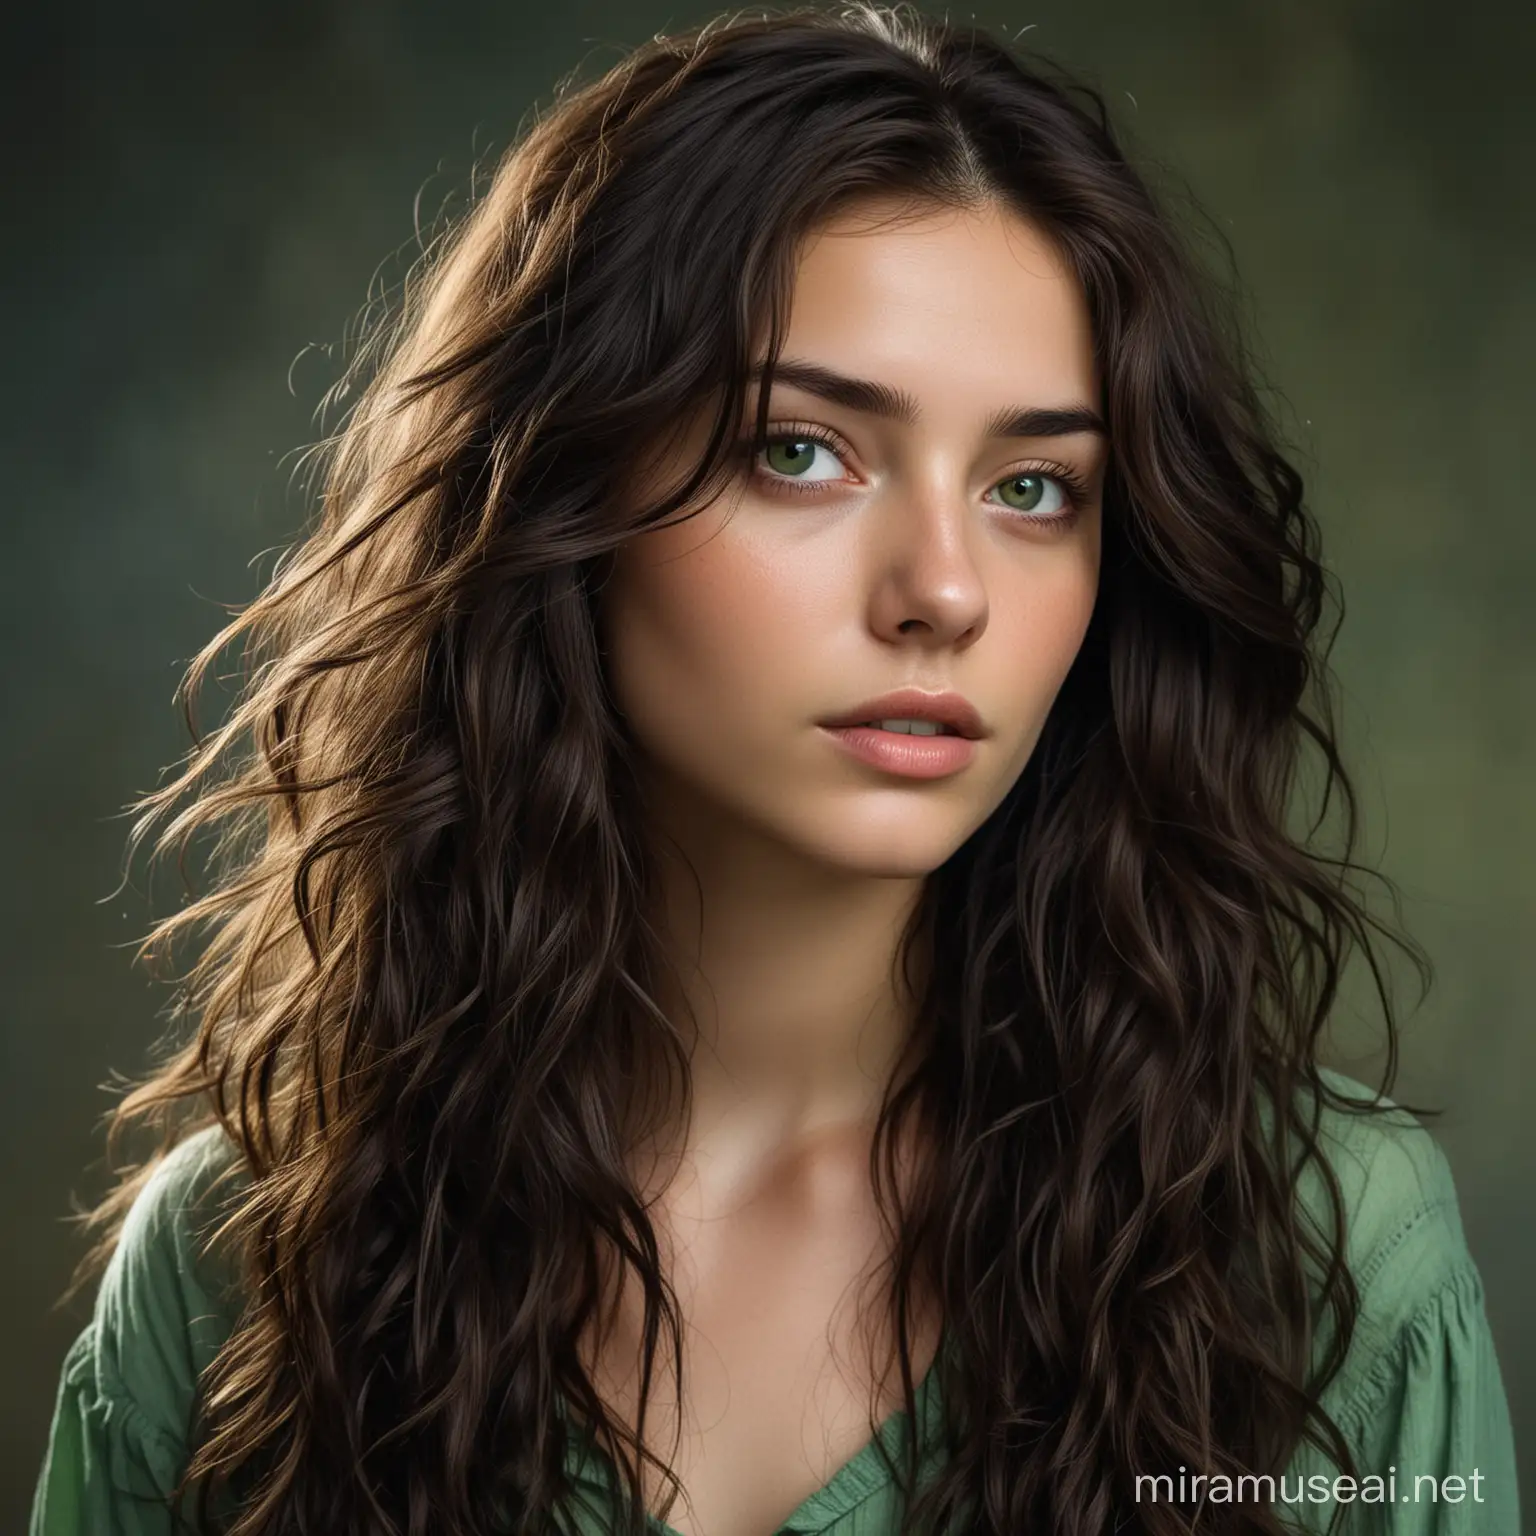 Young Woman with Intense Green Eyes and Cascading Brown Hair